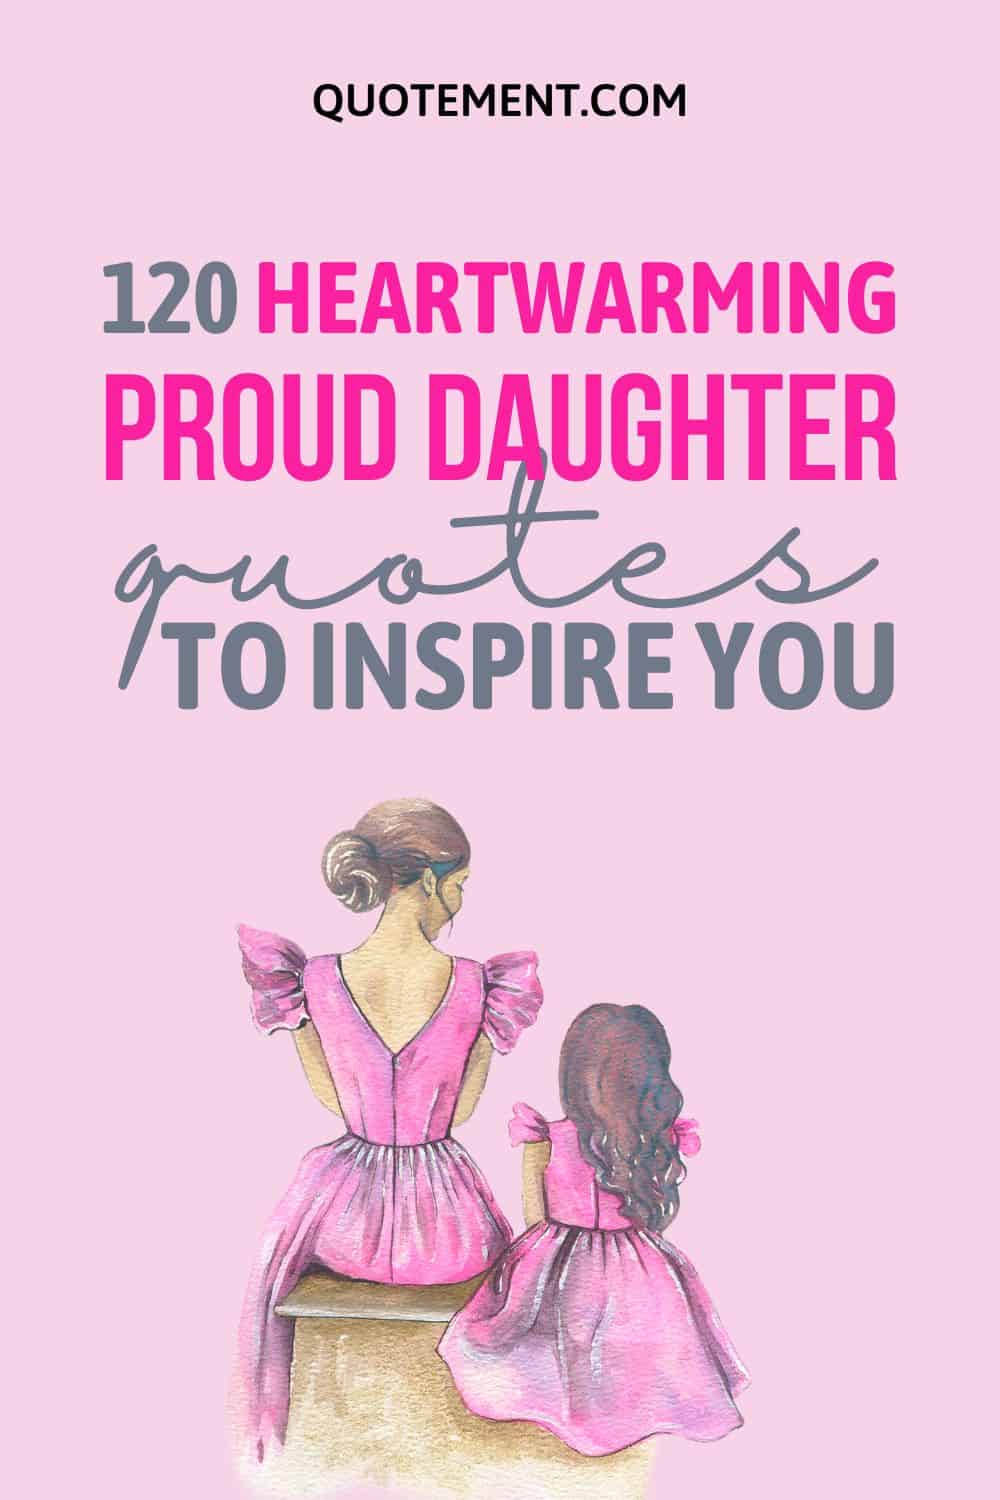 120 Heartwarming Proud Daughter Quotes To Inspire You 